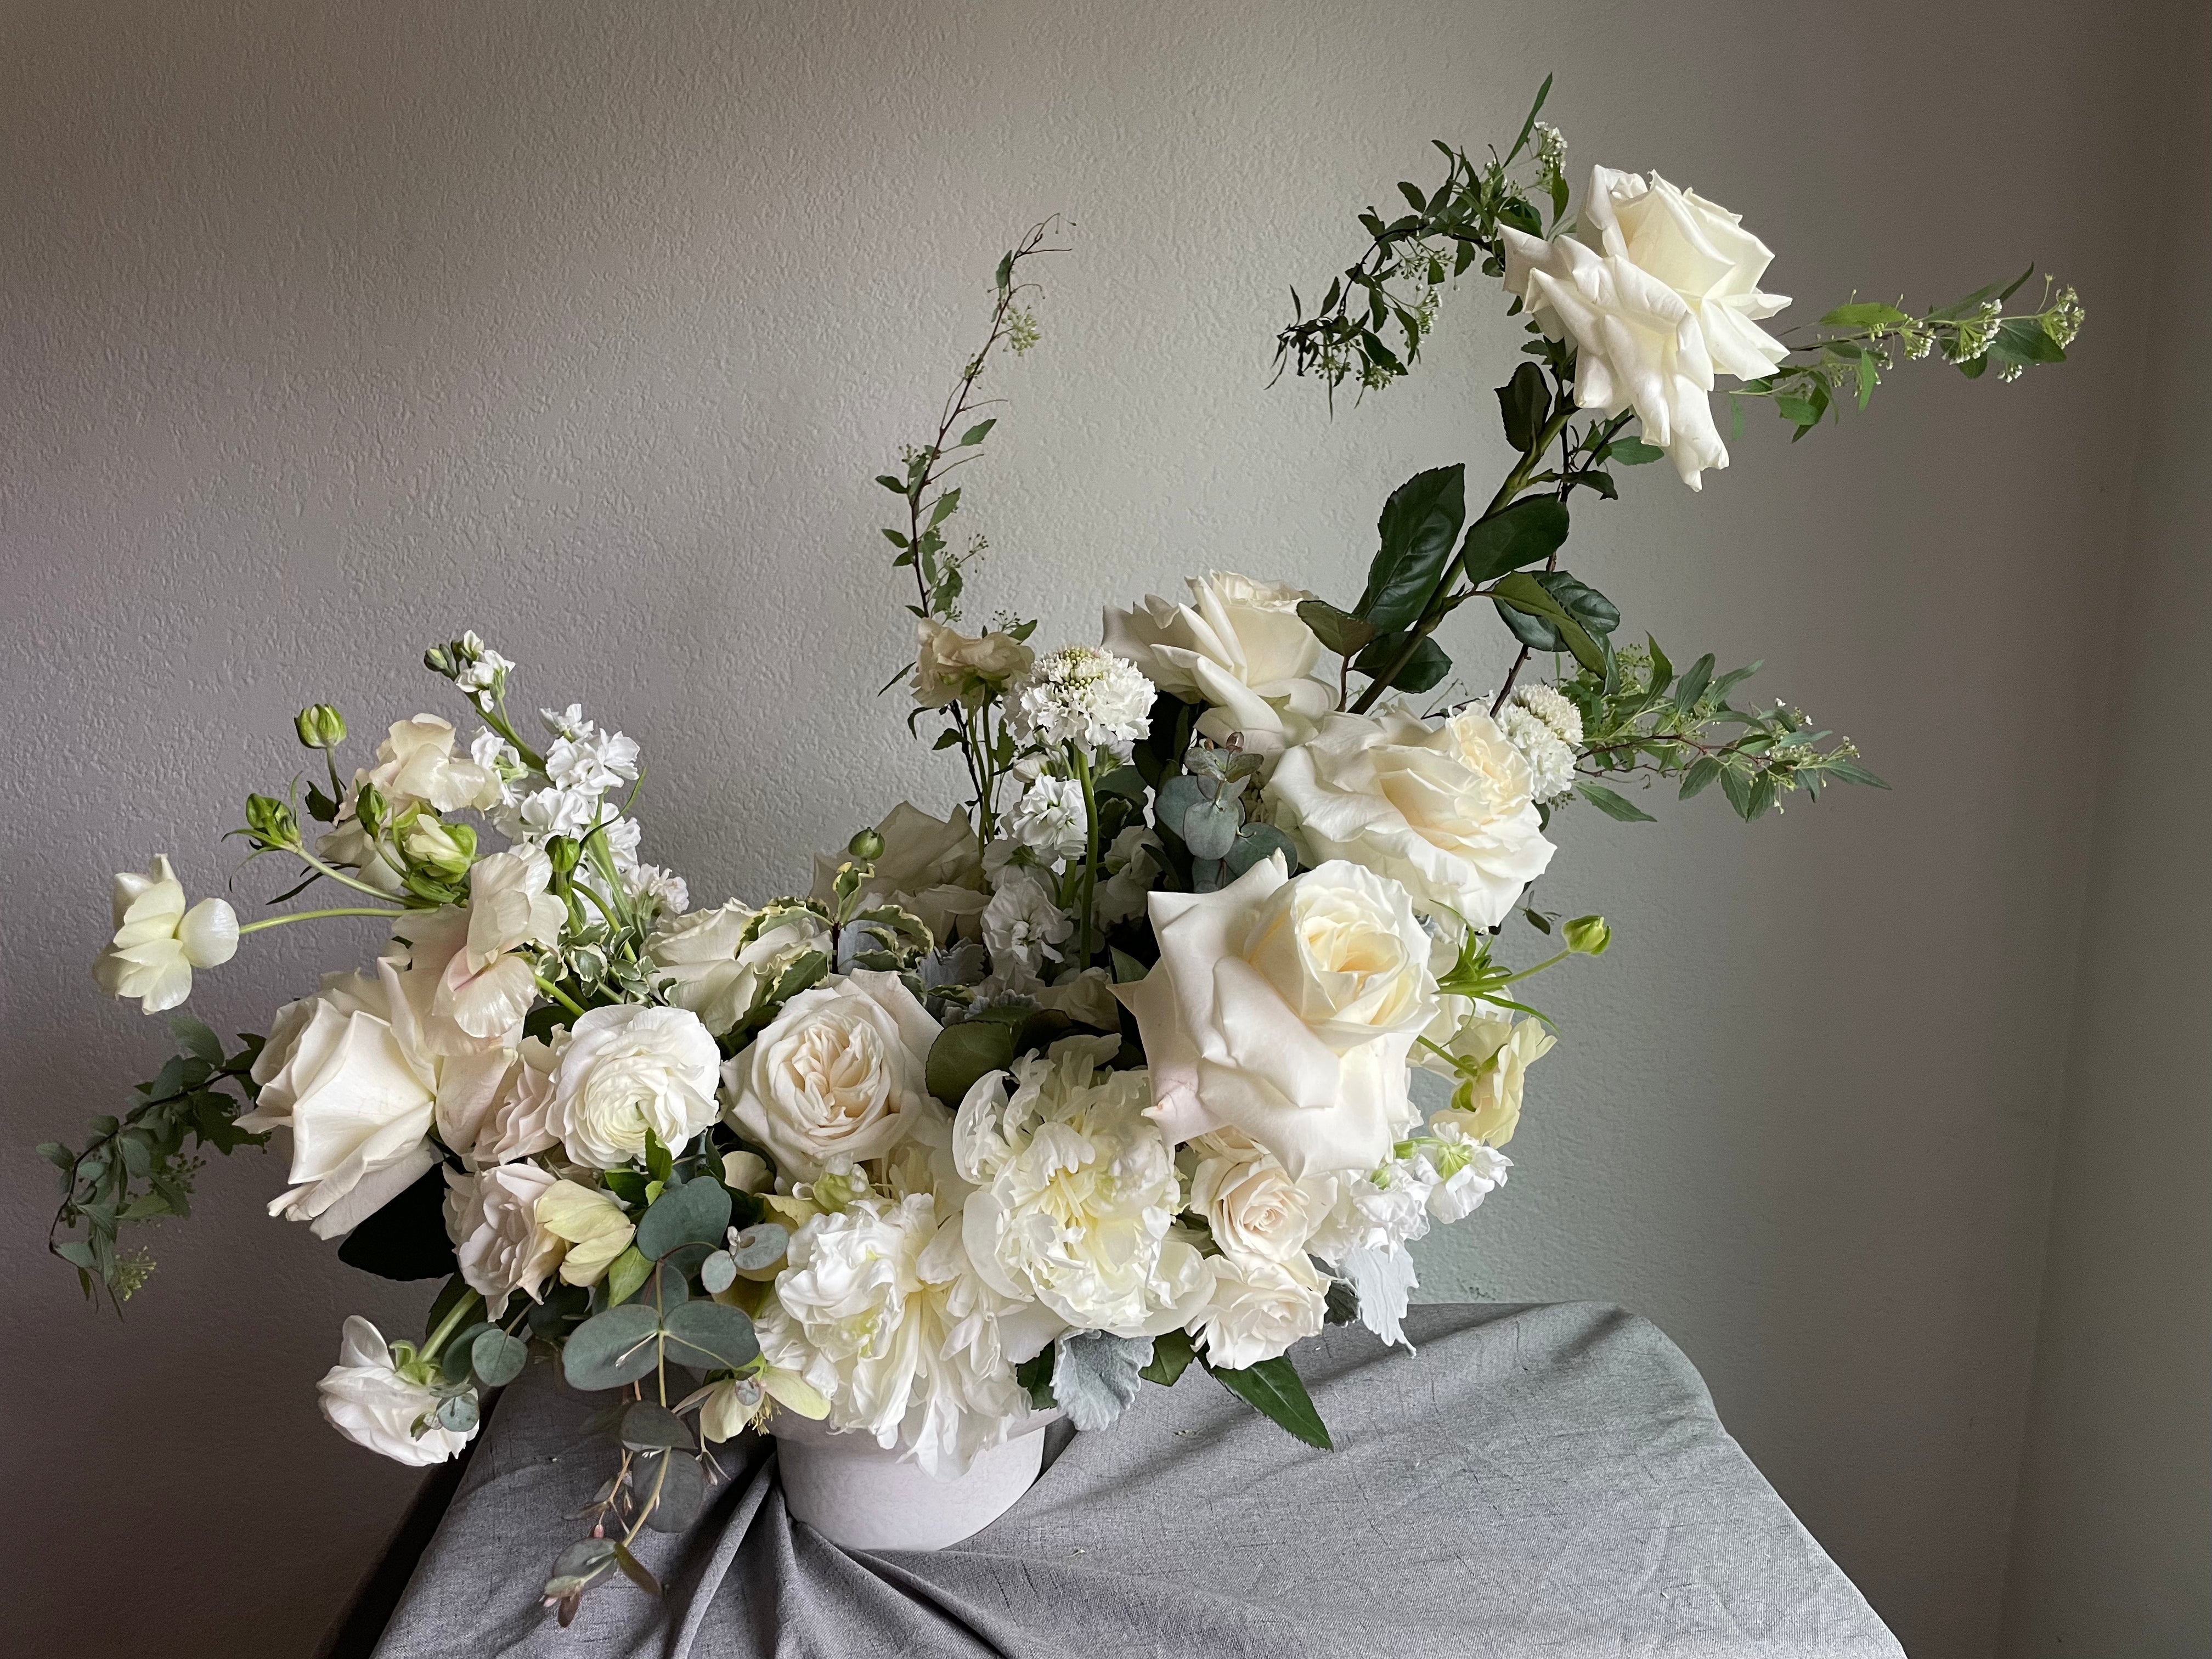 classic white and green arrangement perfect for weddings and events